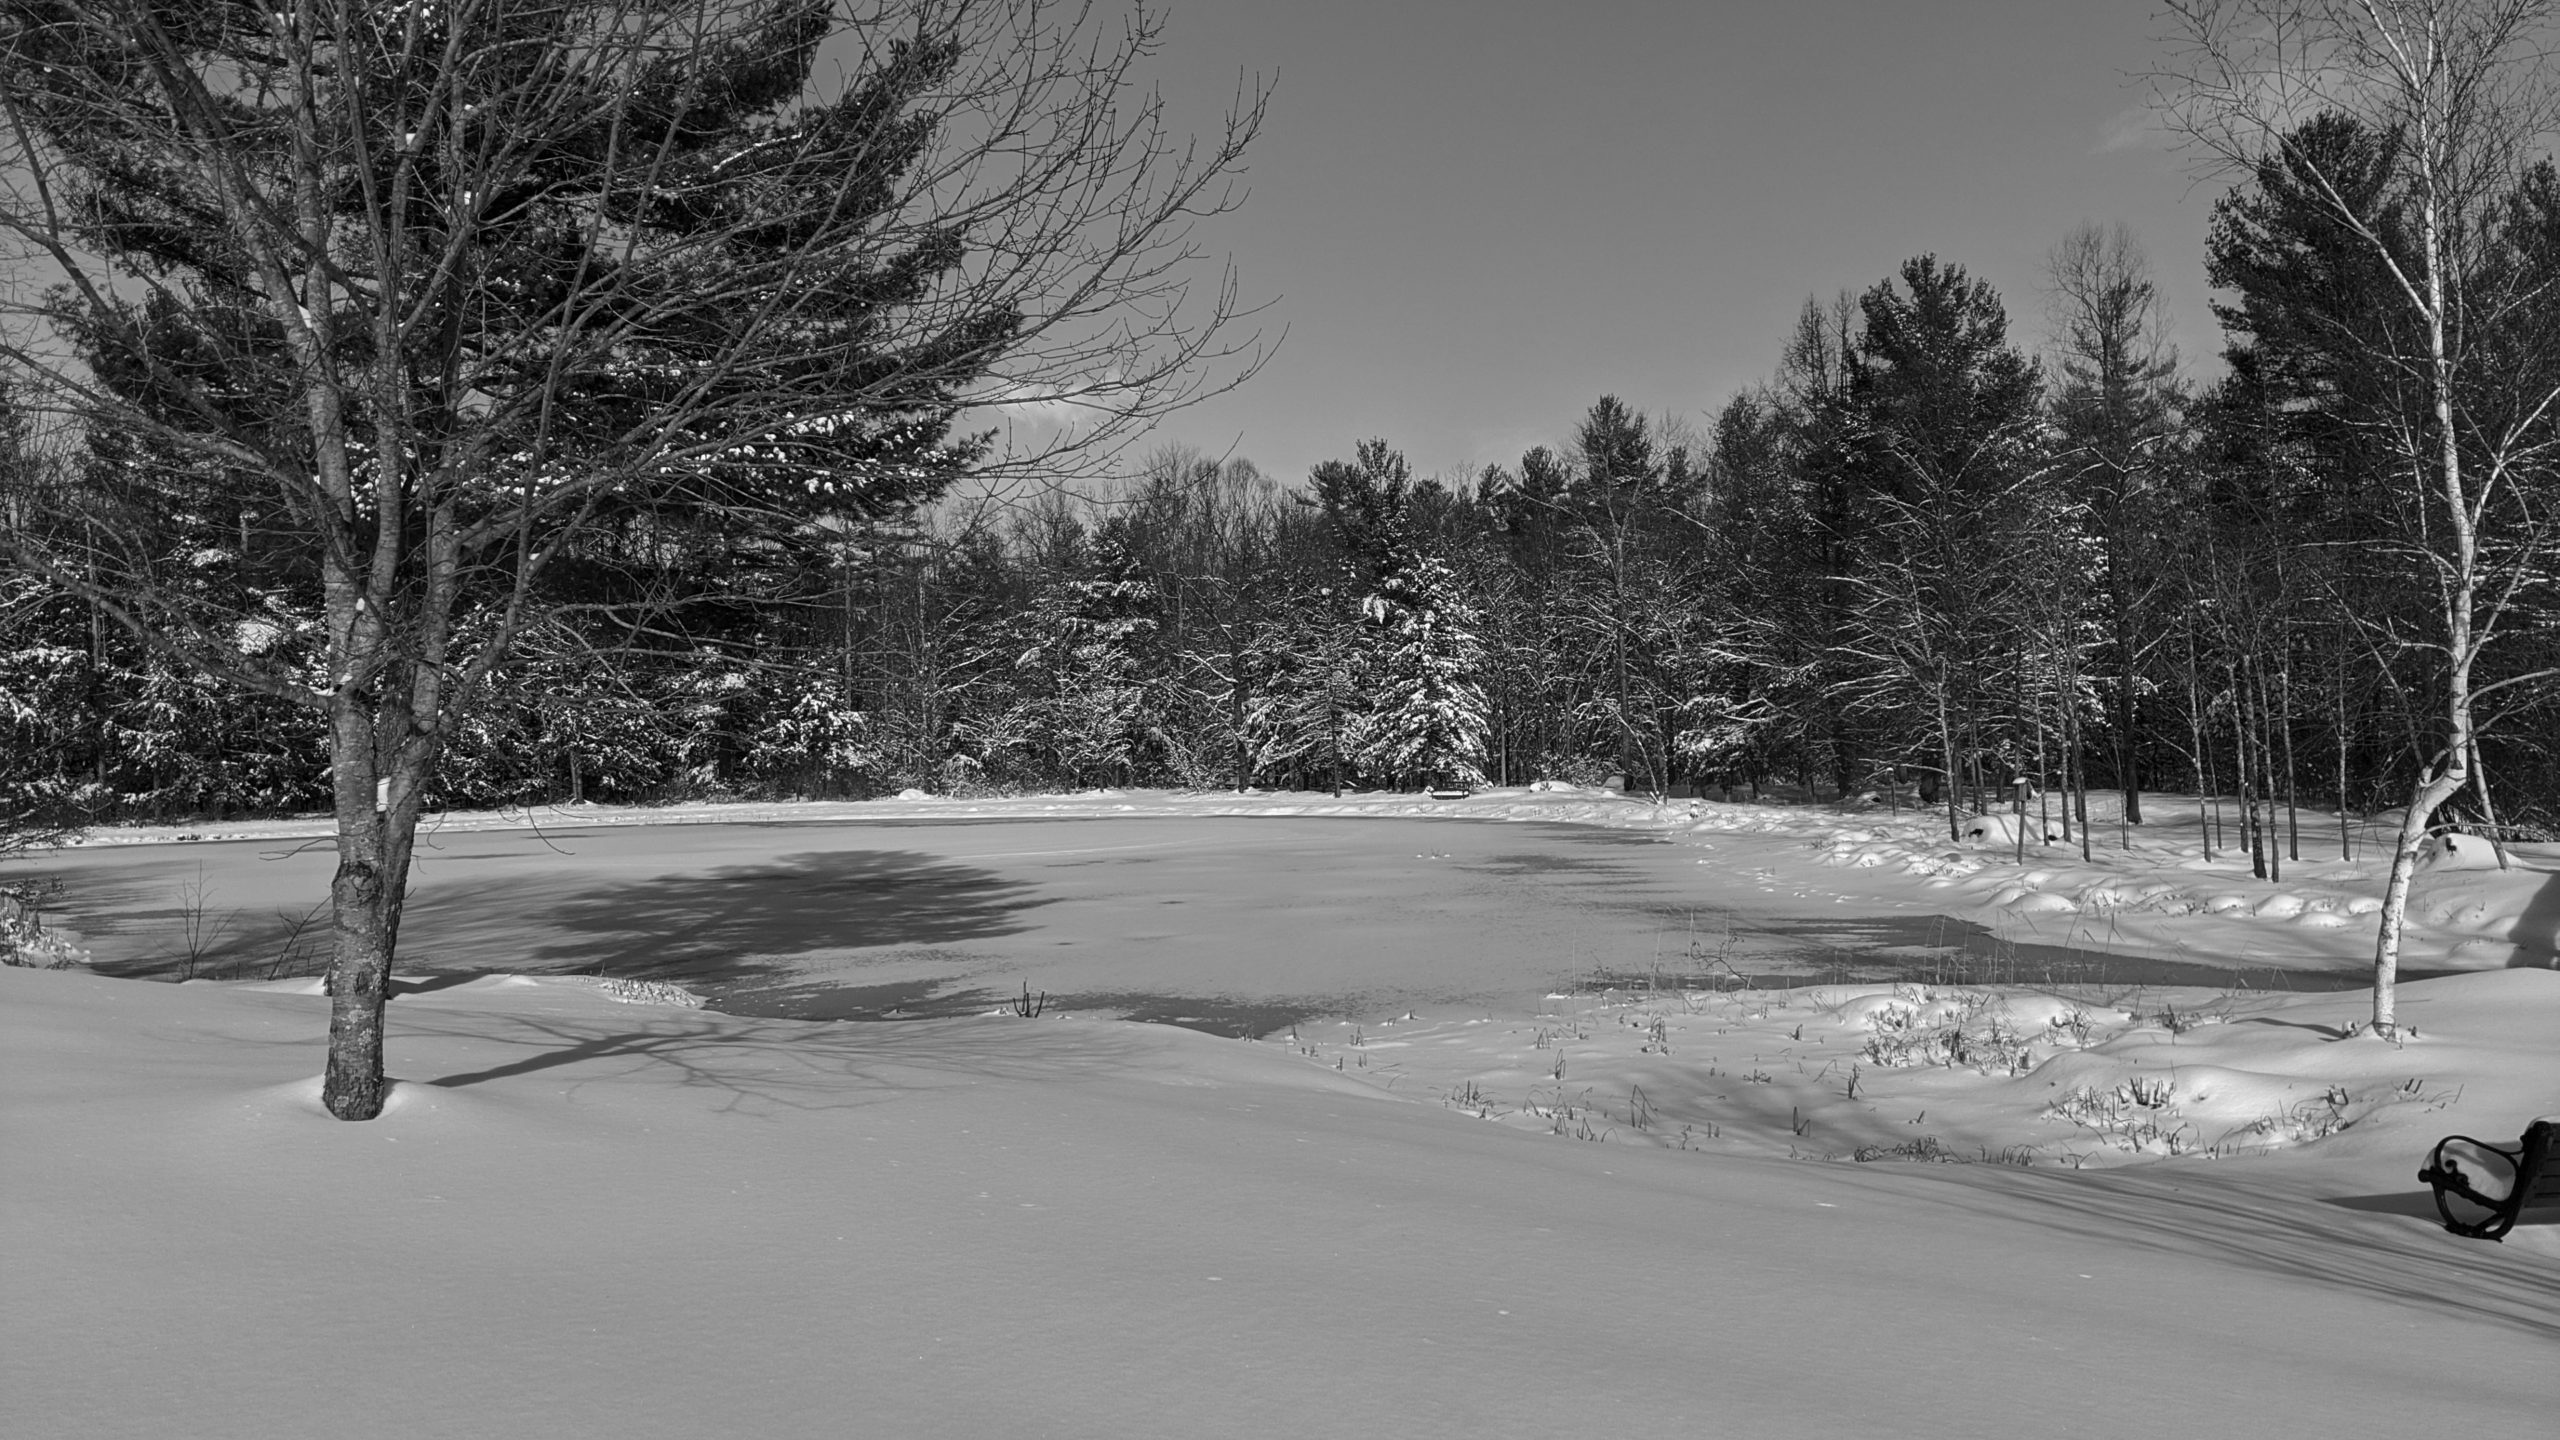 Pond in Winter at our Senior Living Community